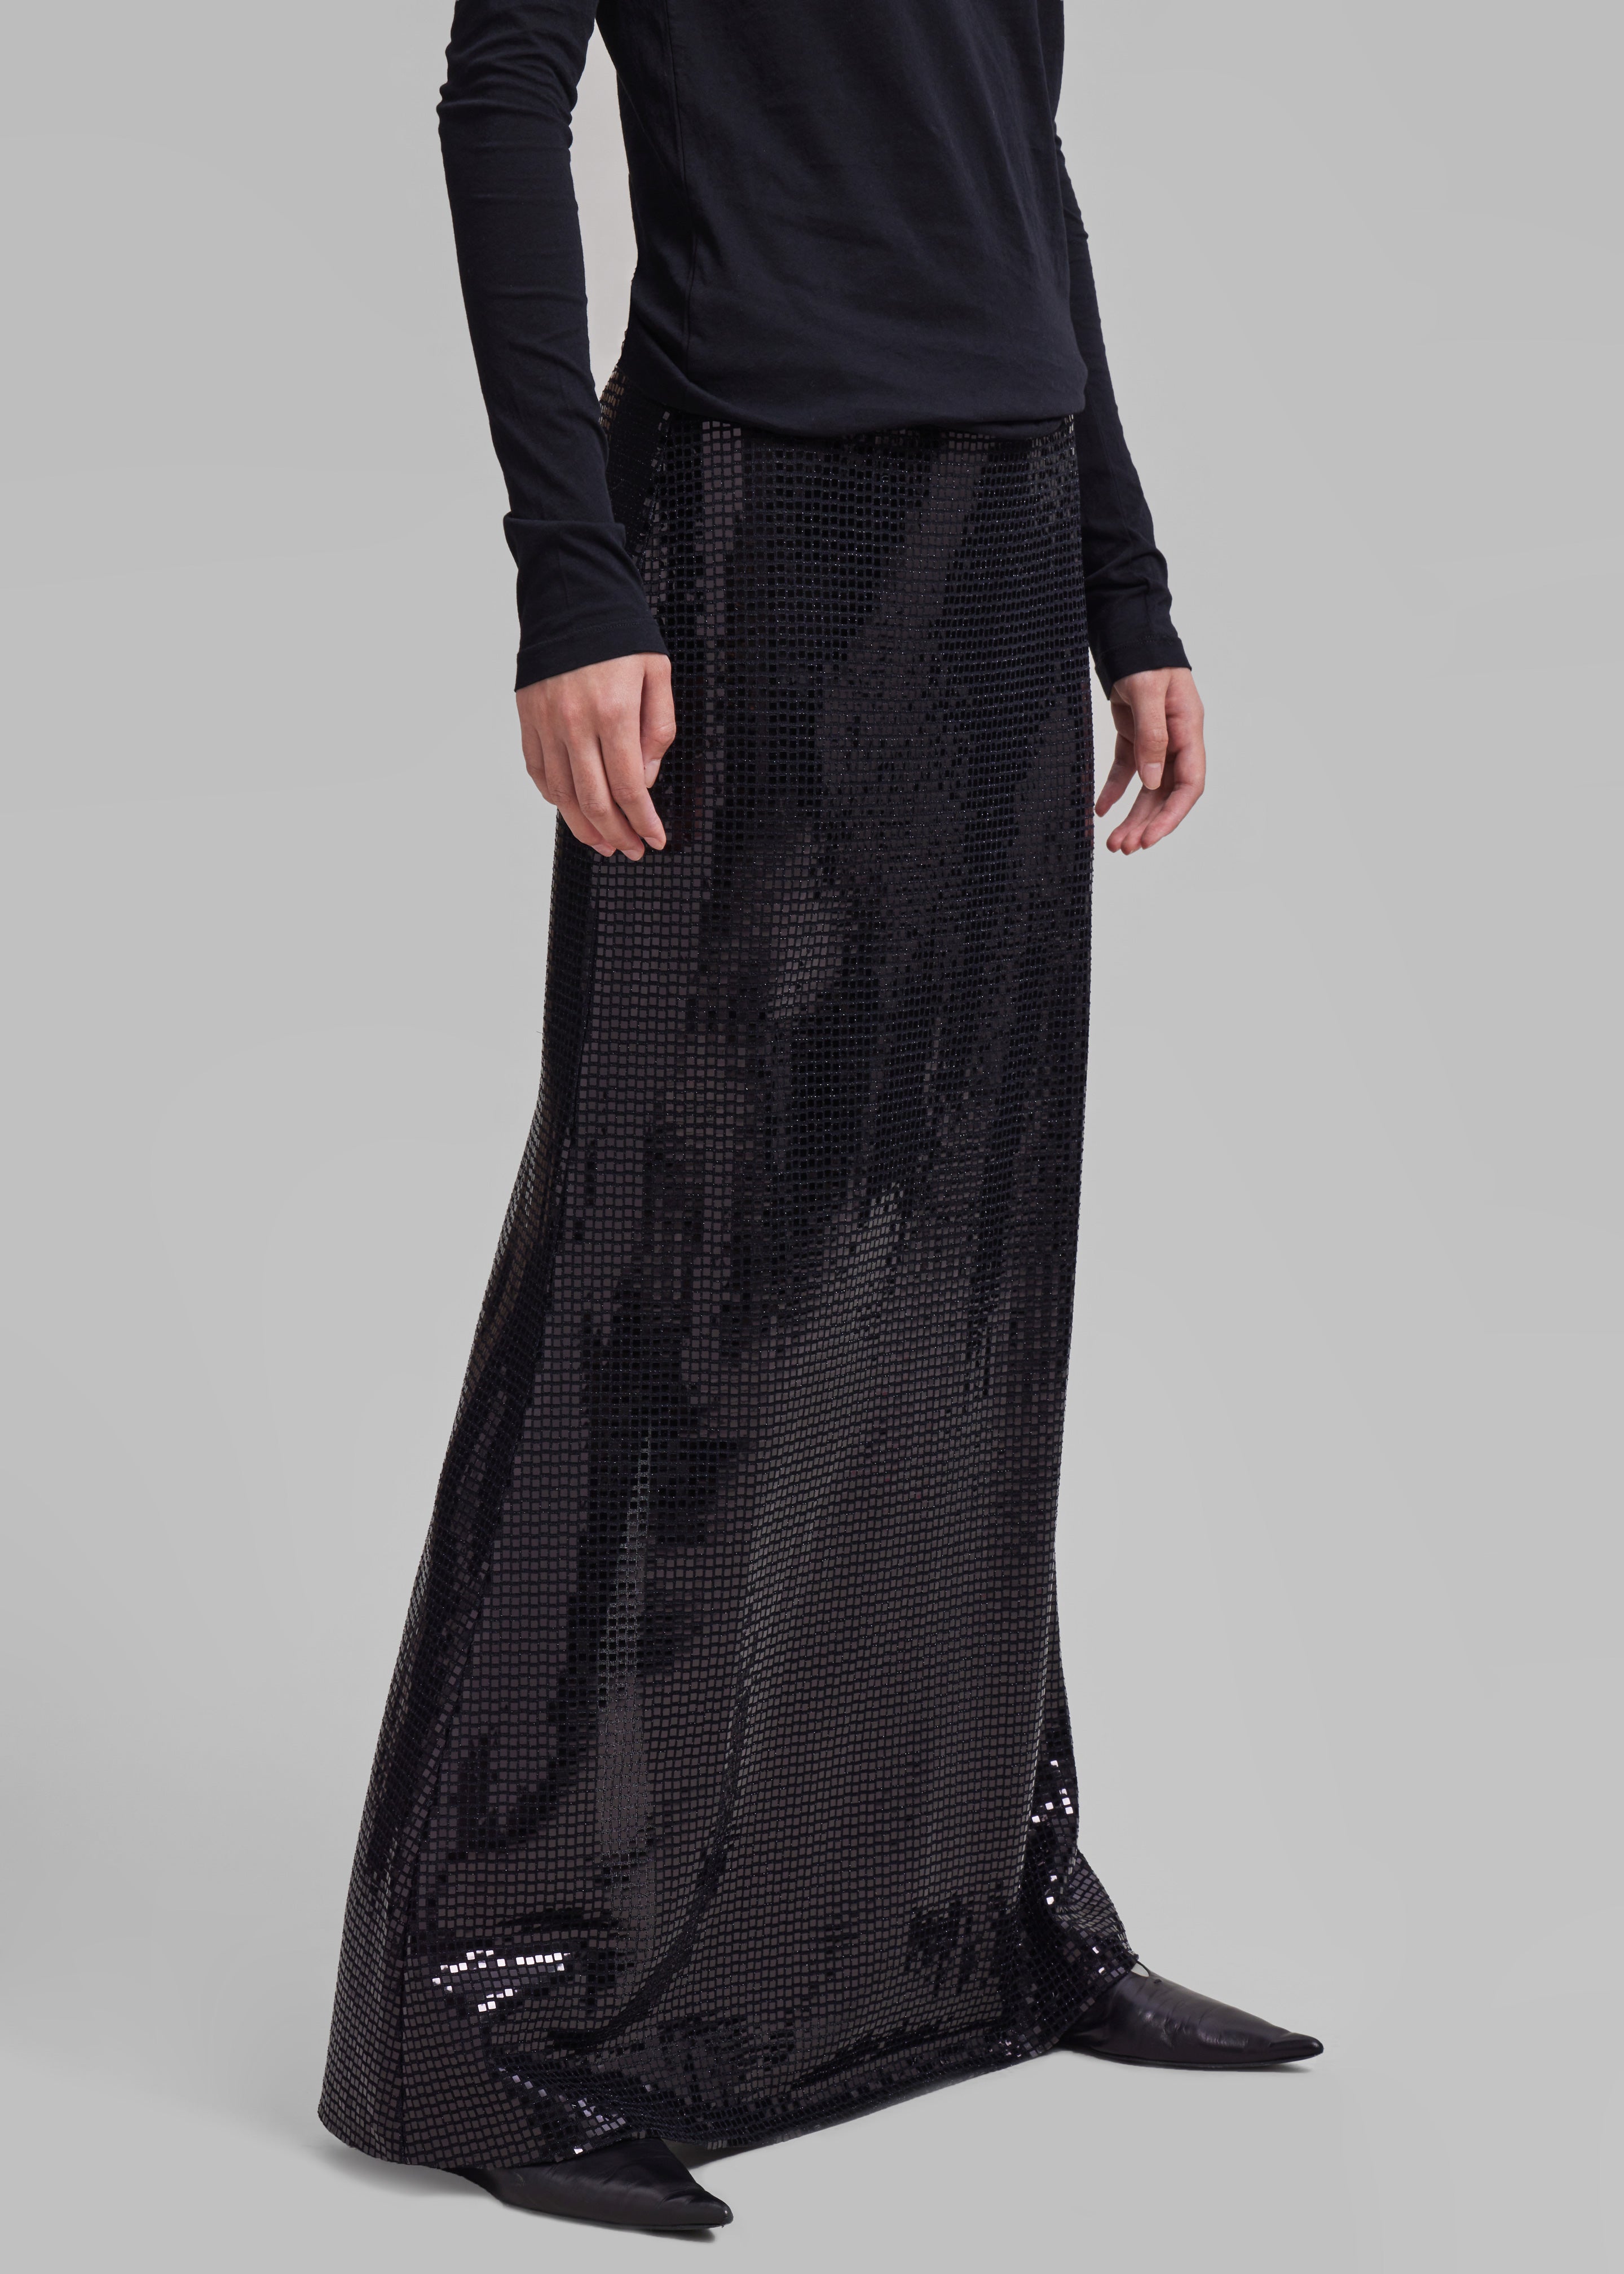 Puppets And Puppets Jane Full Length Skirt - Black - 2